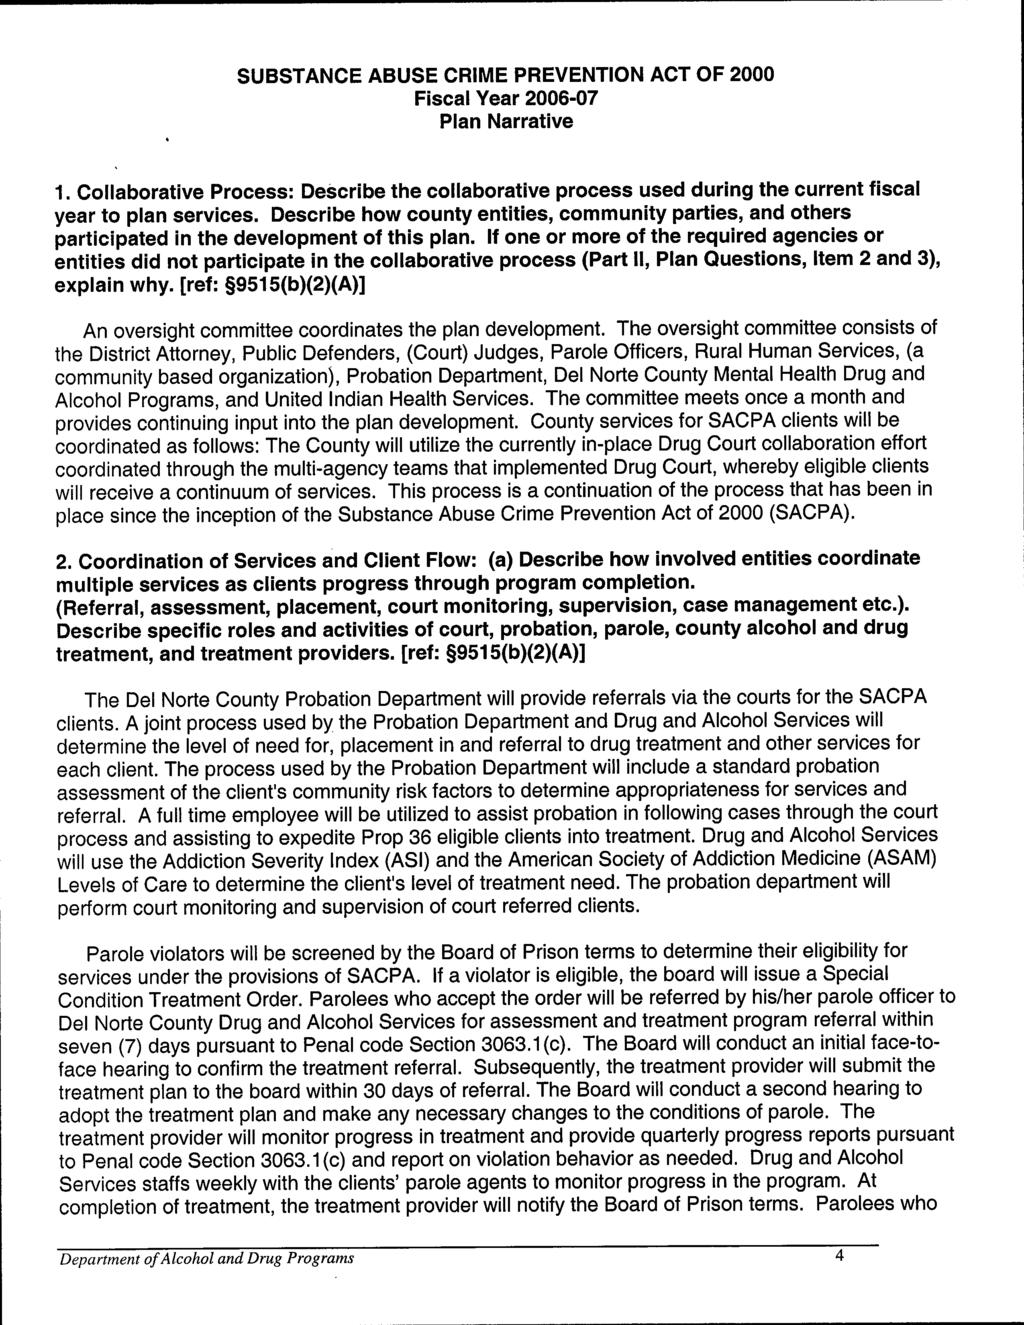 SUBSTANCE ABUSE CRIME PREVENTION ACT OF 2000 Fiscal Year 2006-07 Plan Narrative 1. Collaborative Process : Describe the collaborative process used during the current fiscal year to plan services.